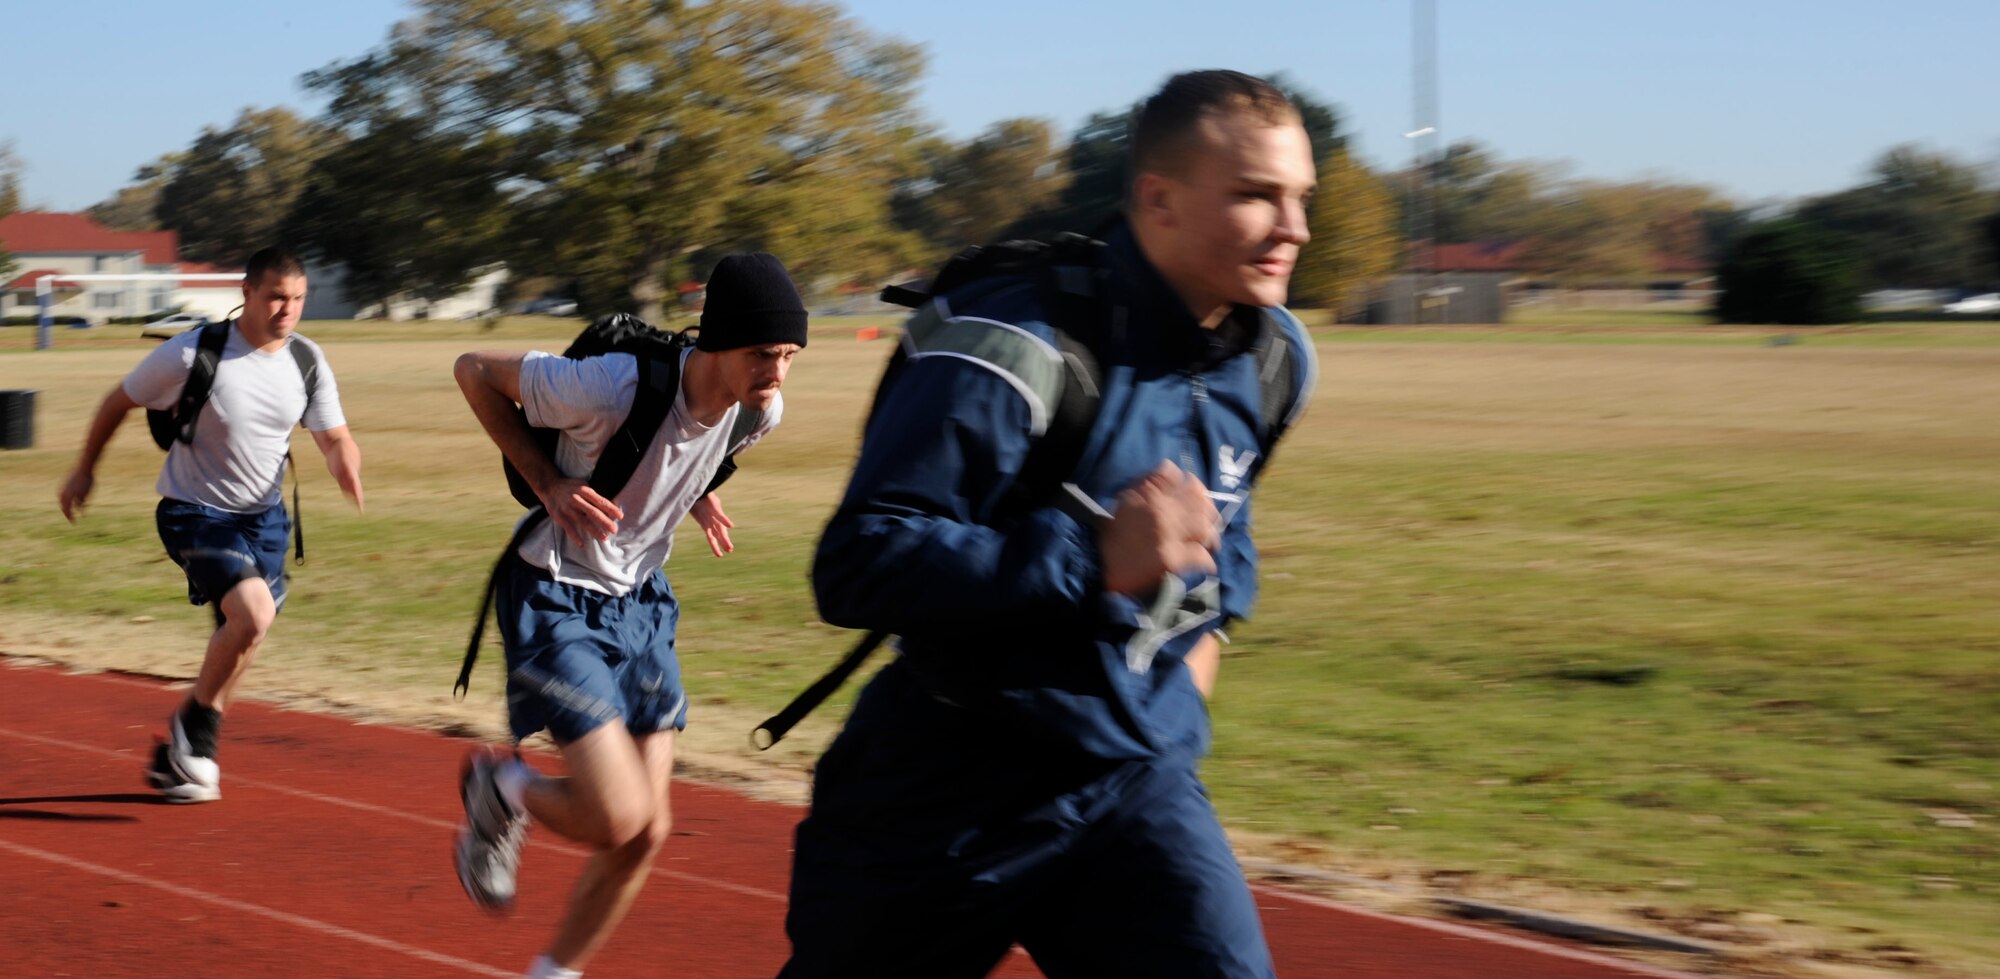 Barksdale Airmen run around the track during a rucksack relay race as a part of the 2012 Sports Day on Barksdale Air Force Base, La., Nov. 16. This annual event gives Airmen the opportunity to participate in several individual and team sports throughout the day boosting morale. (U.S. Air Force photo/Airman 1st Class Andrew Moua)(RELEASED)